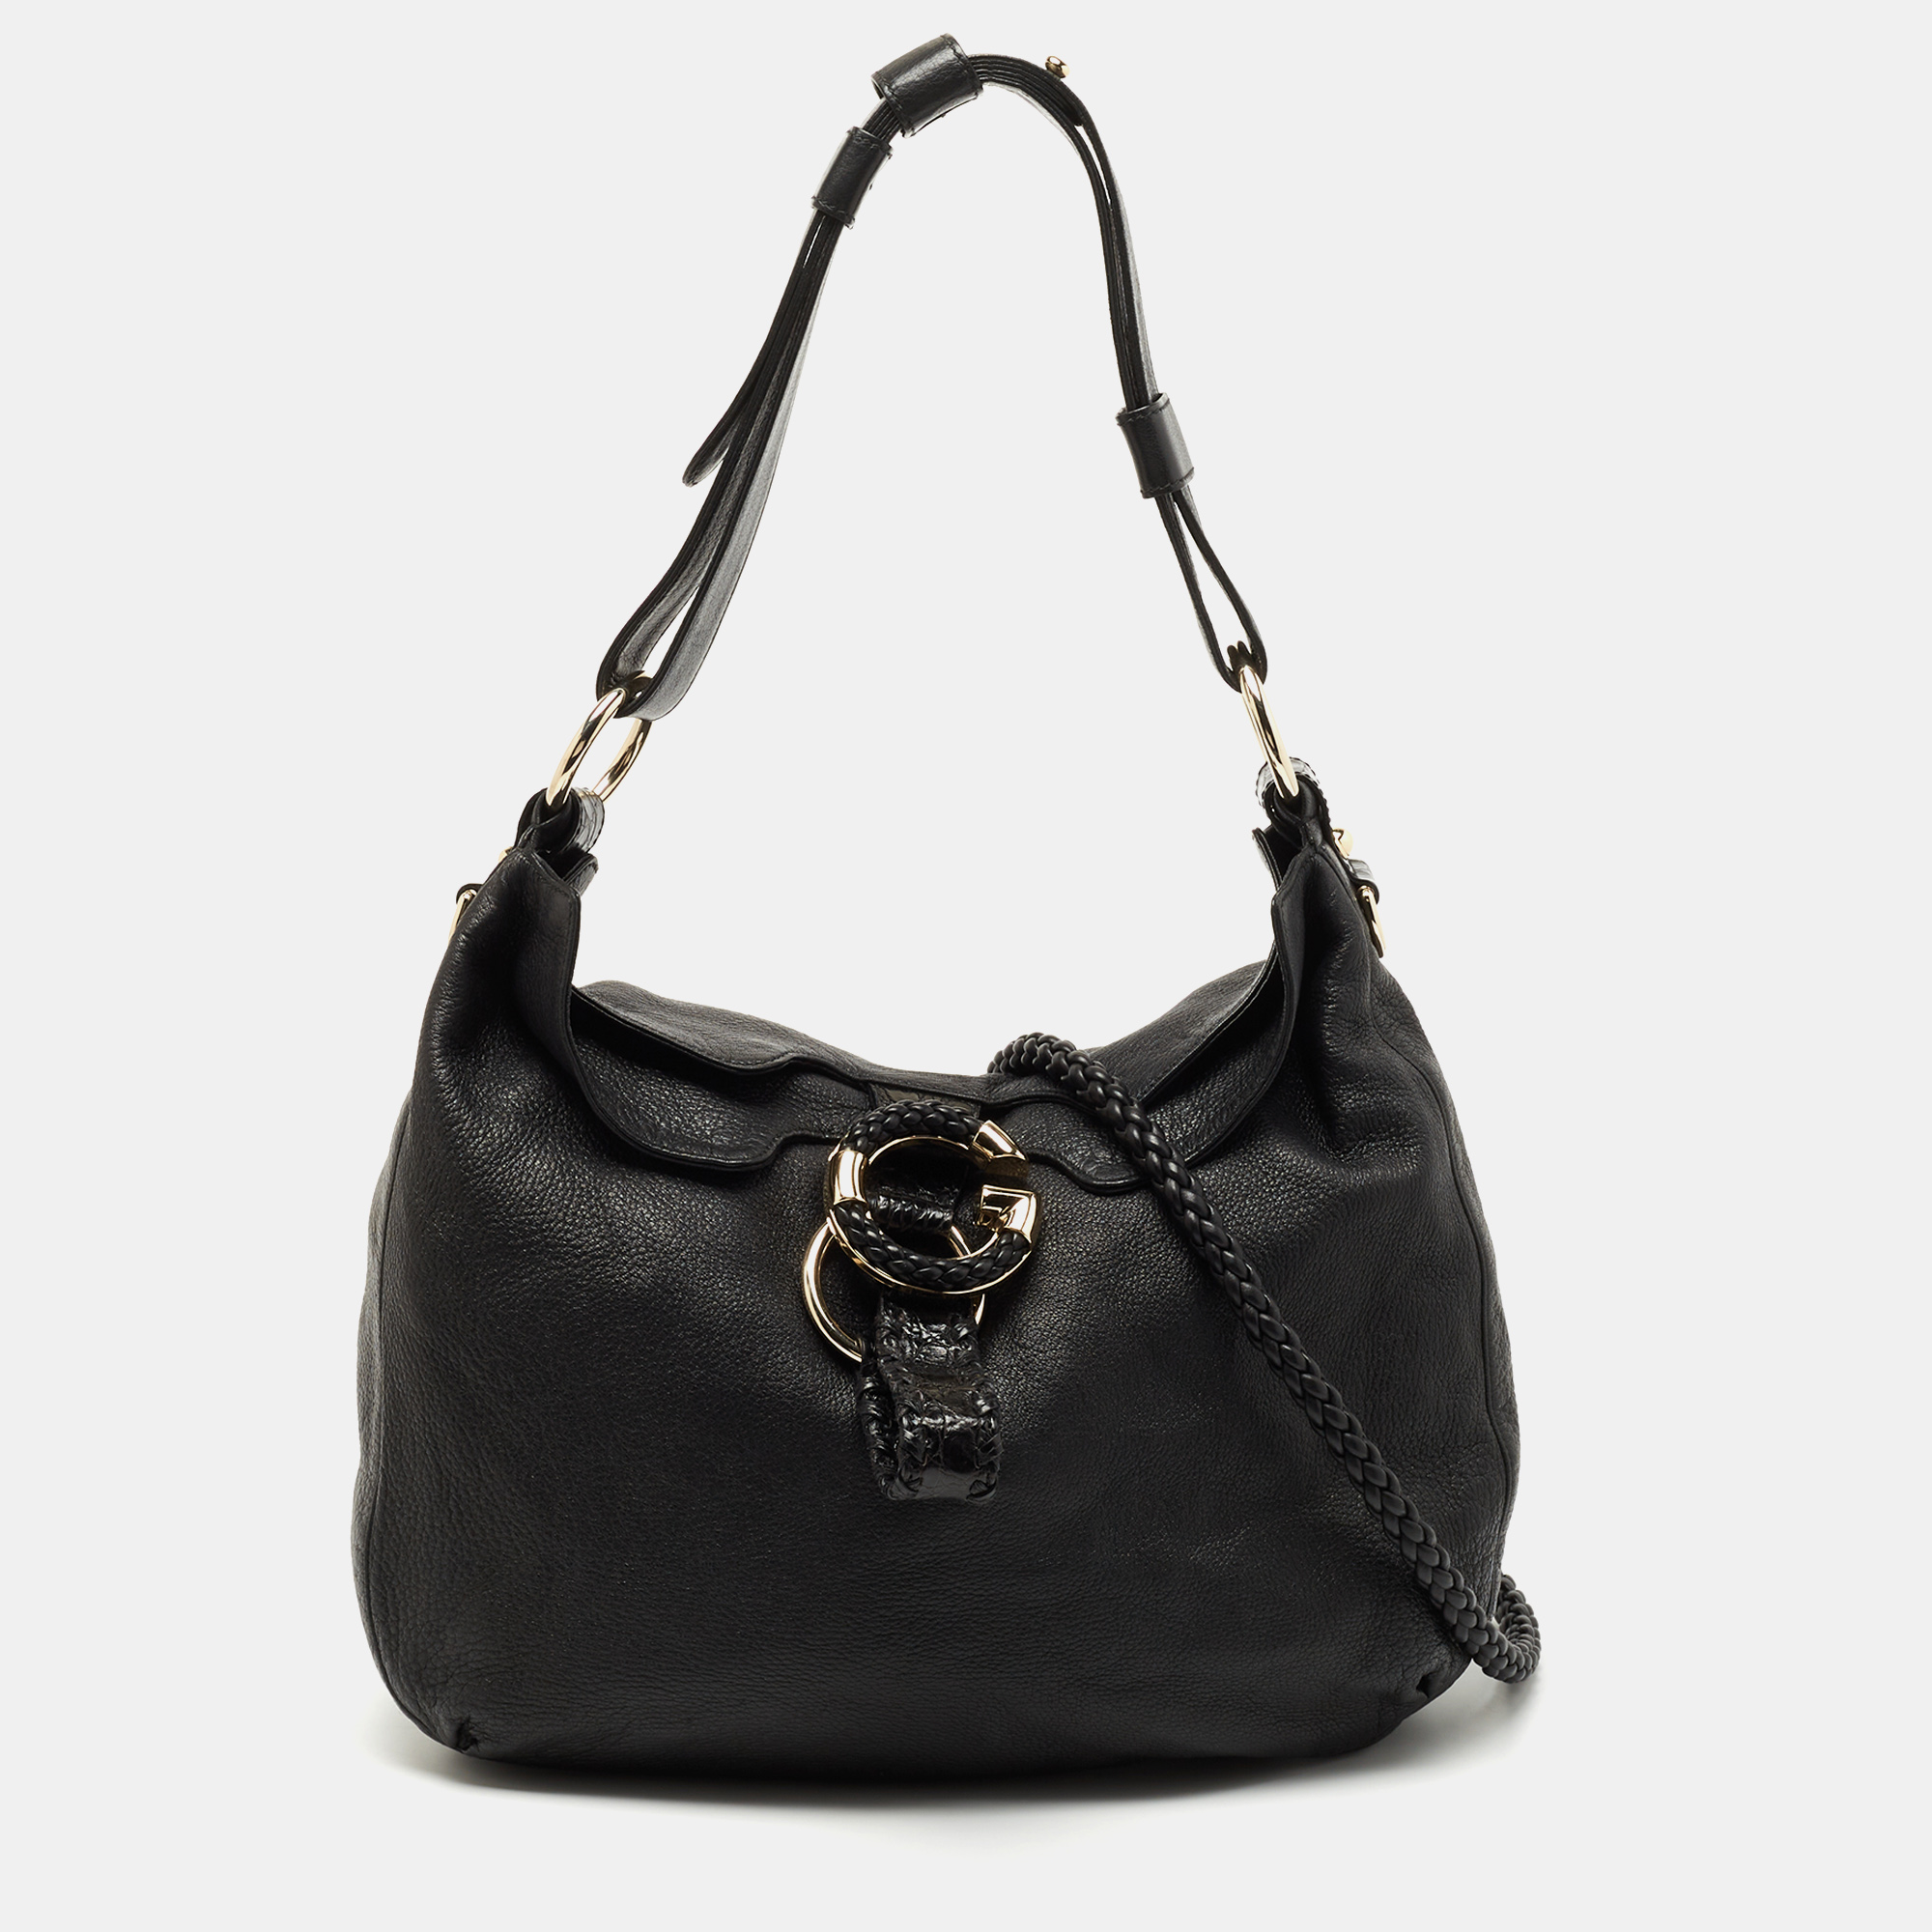 Gucci Leather G Wave Hobo